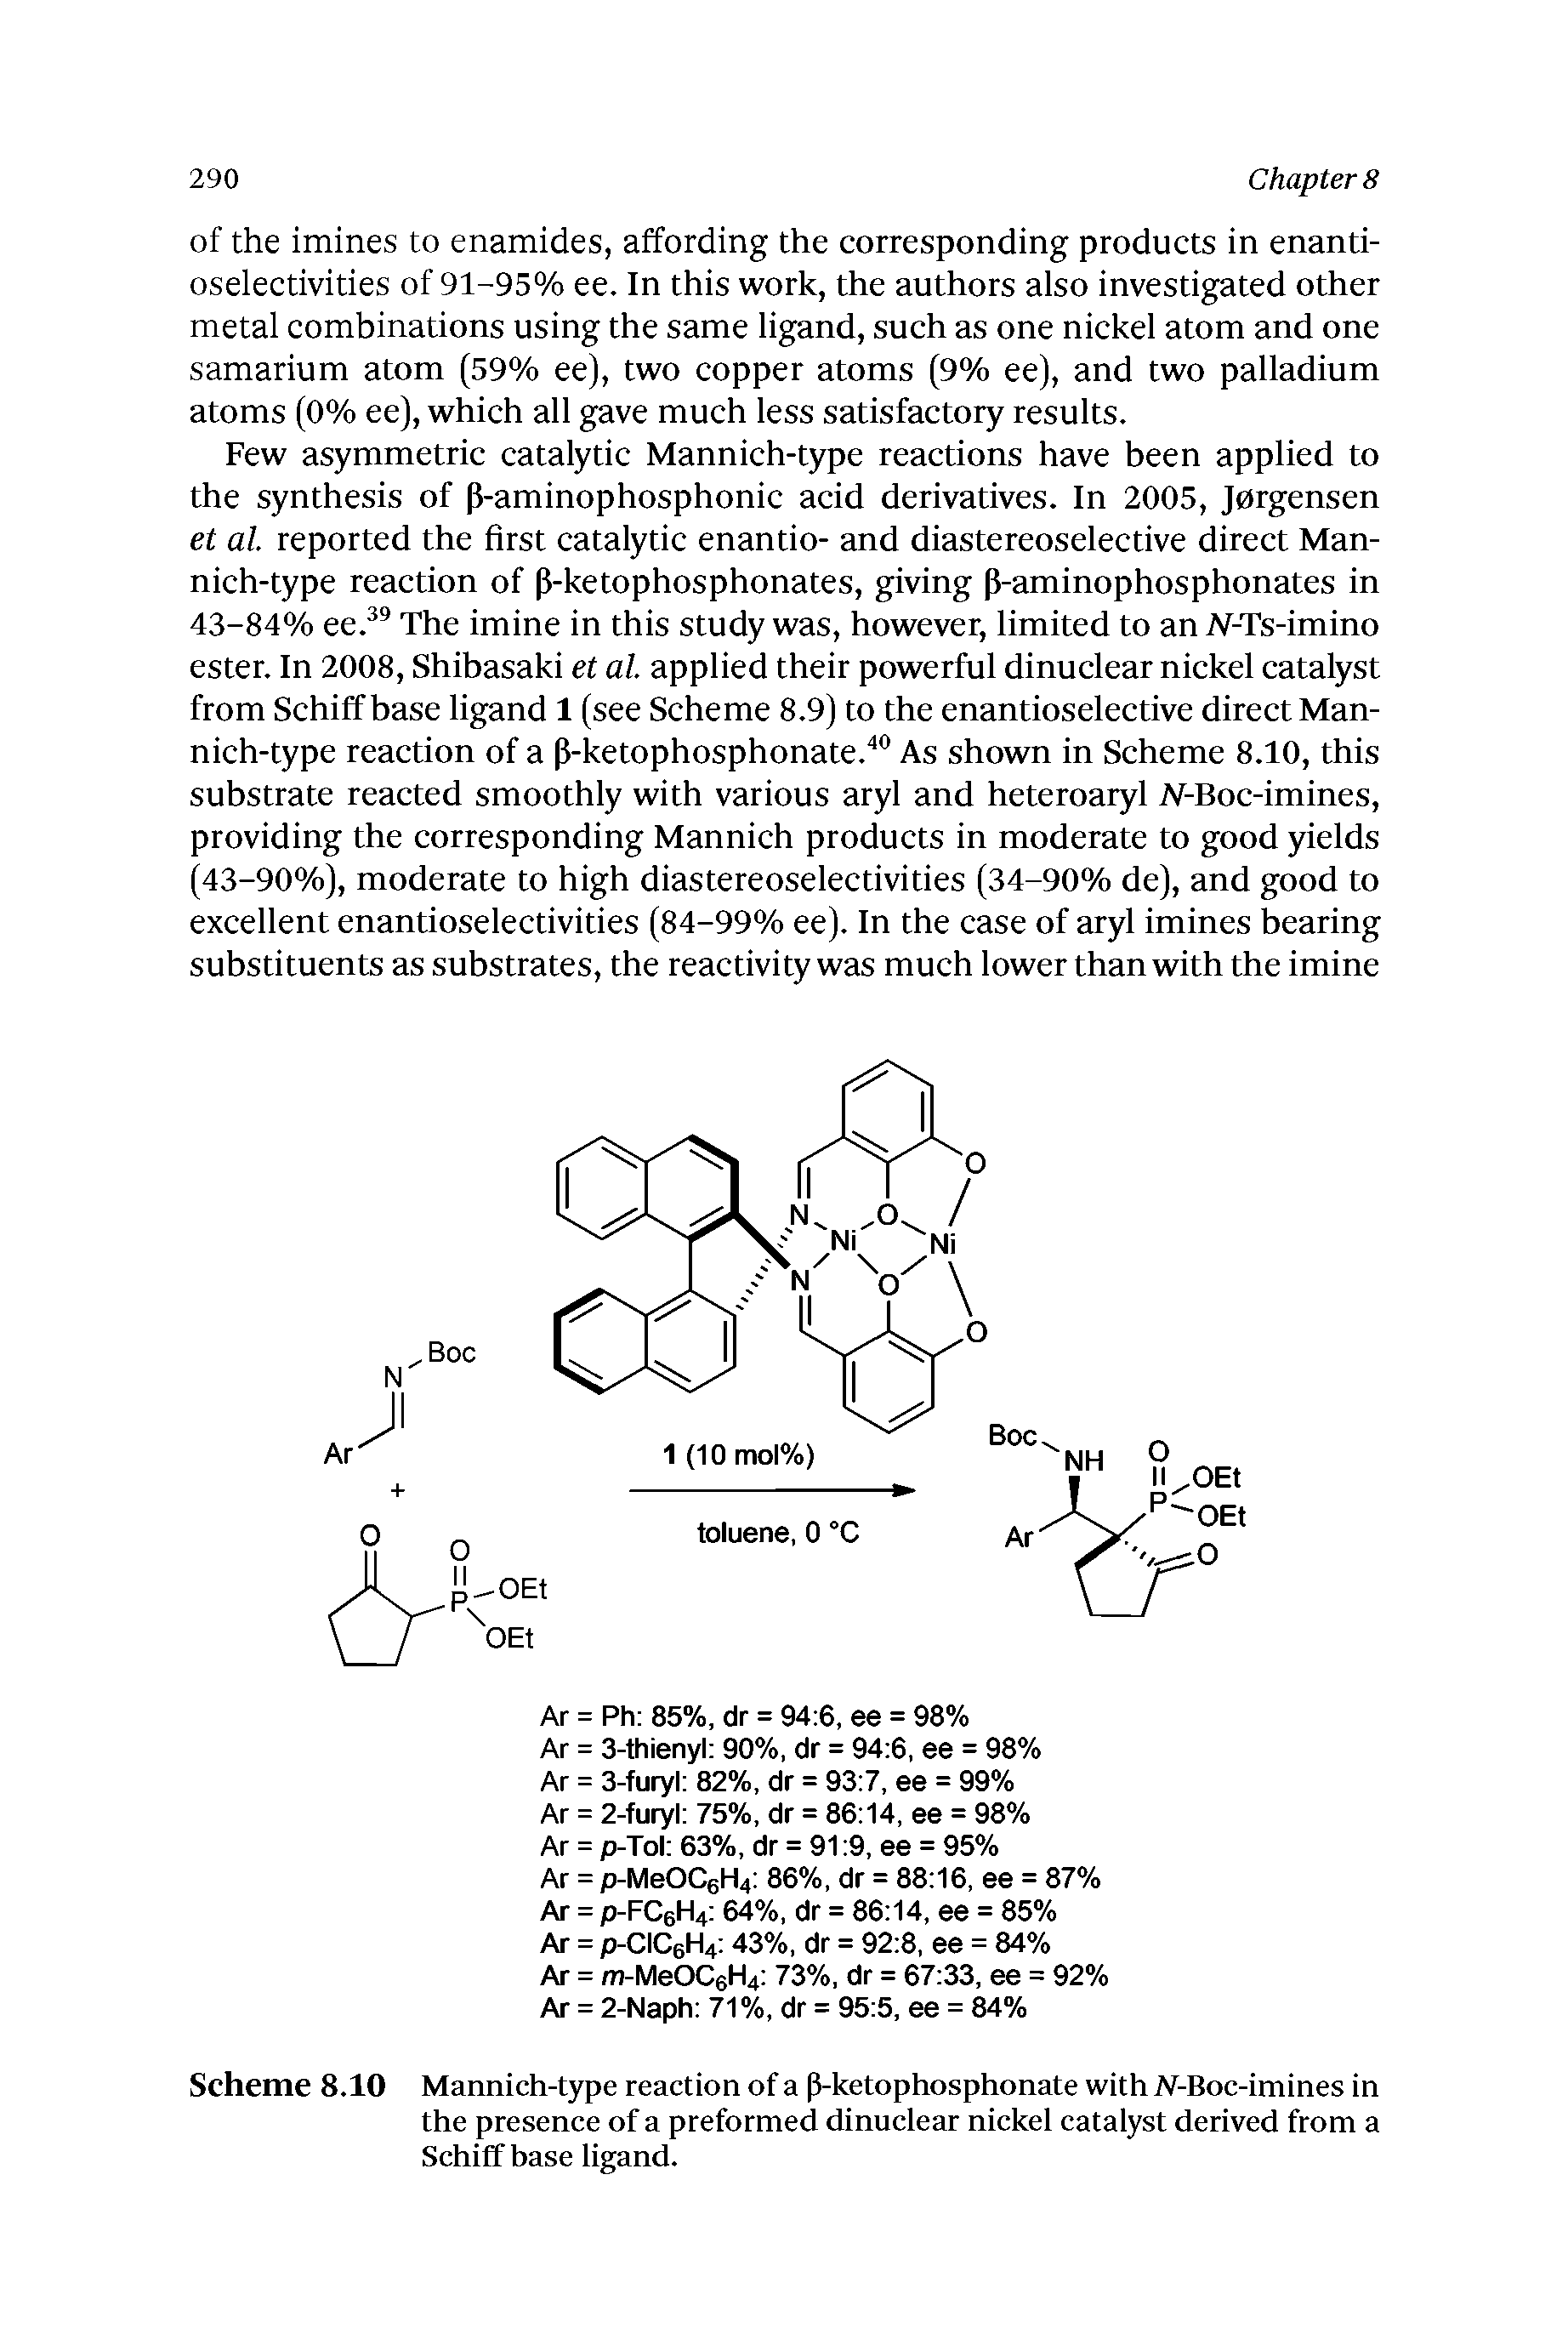 Scheme 8.10 Mannich-type reaction of a p-ketophosphonate with N-Boc-imines in the presence of a preformed dinuclear nickel catalyst derived from a Schiff base ligand.